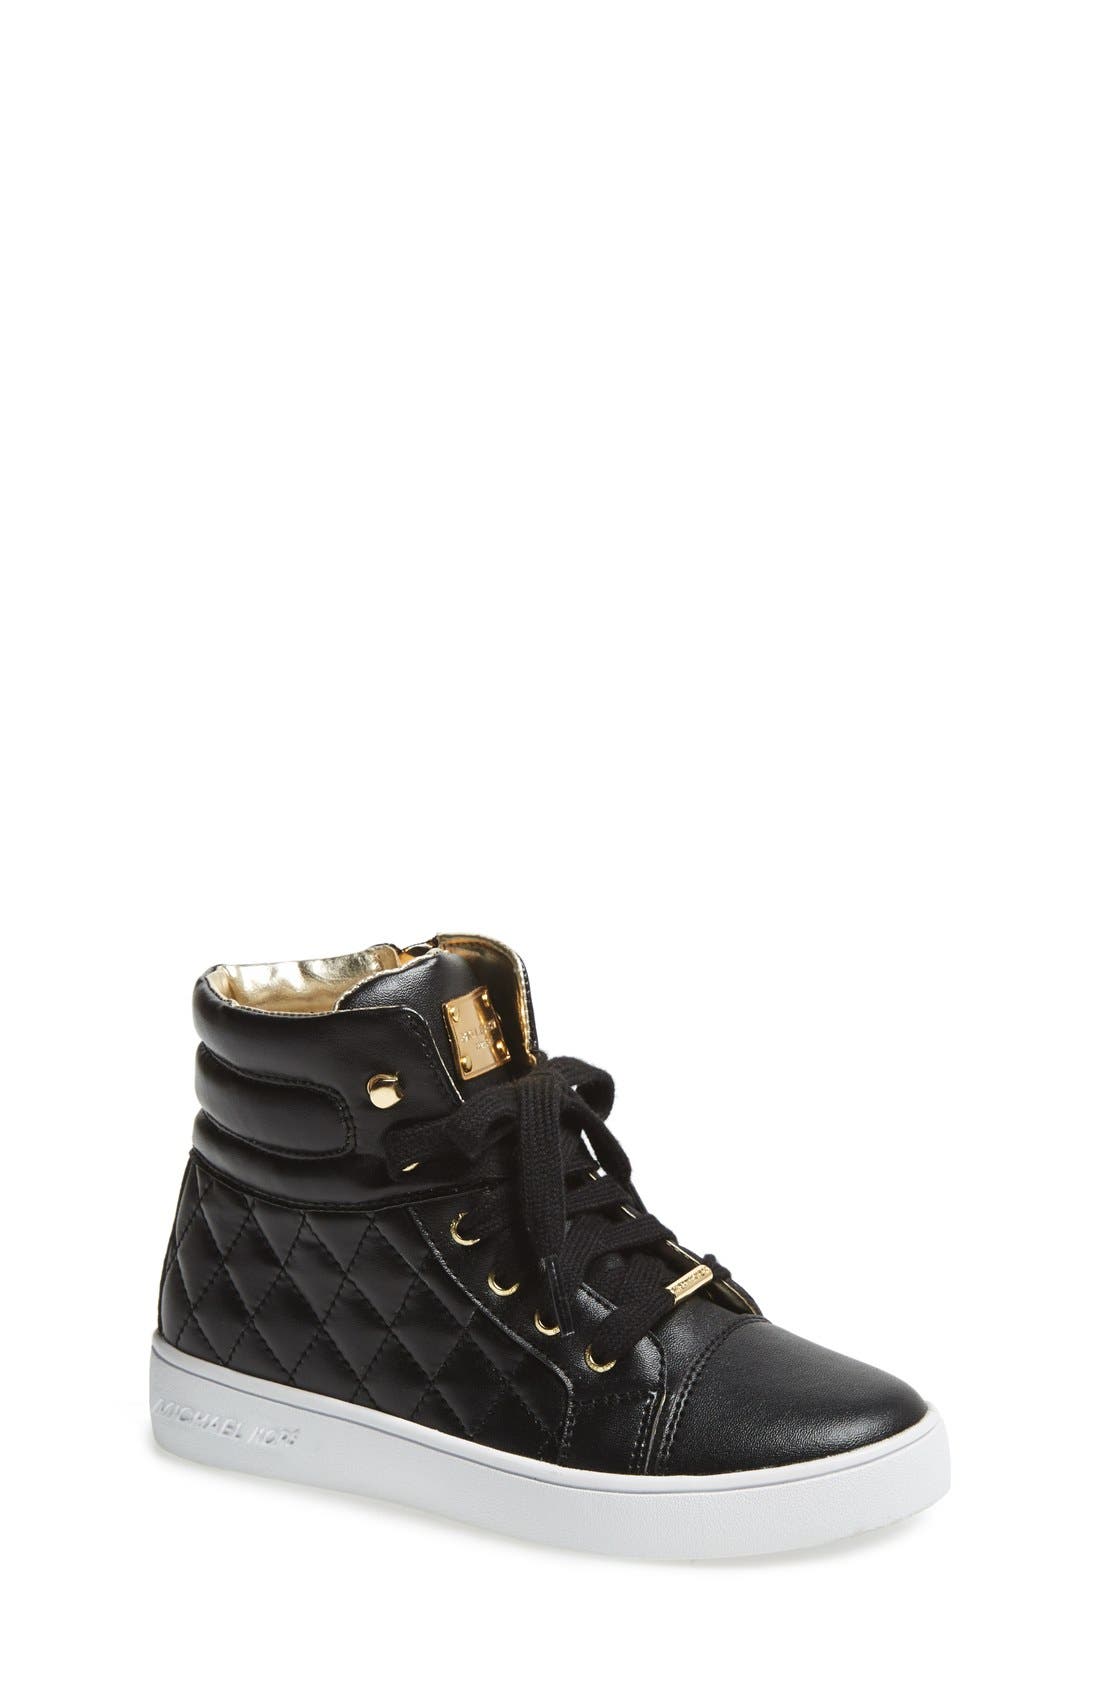 michael kors quilted shoes